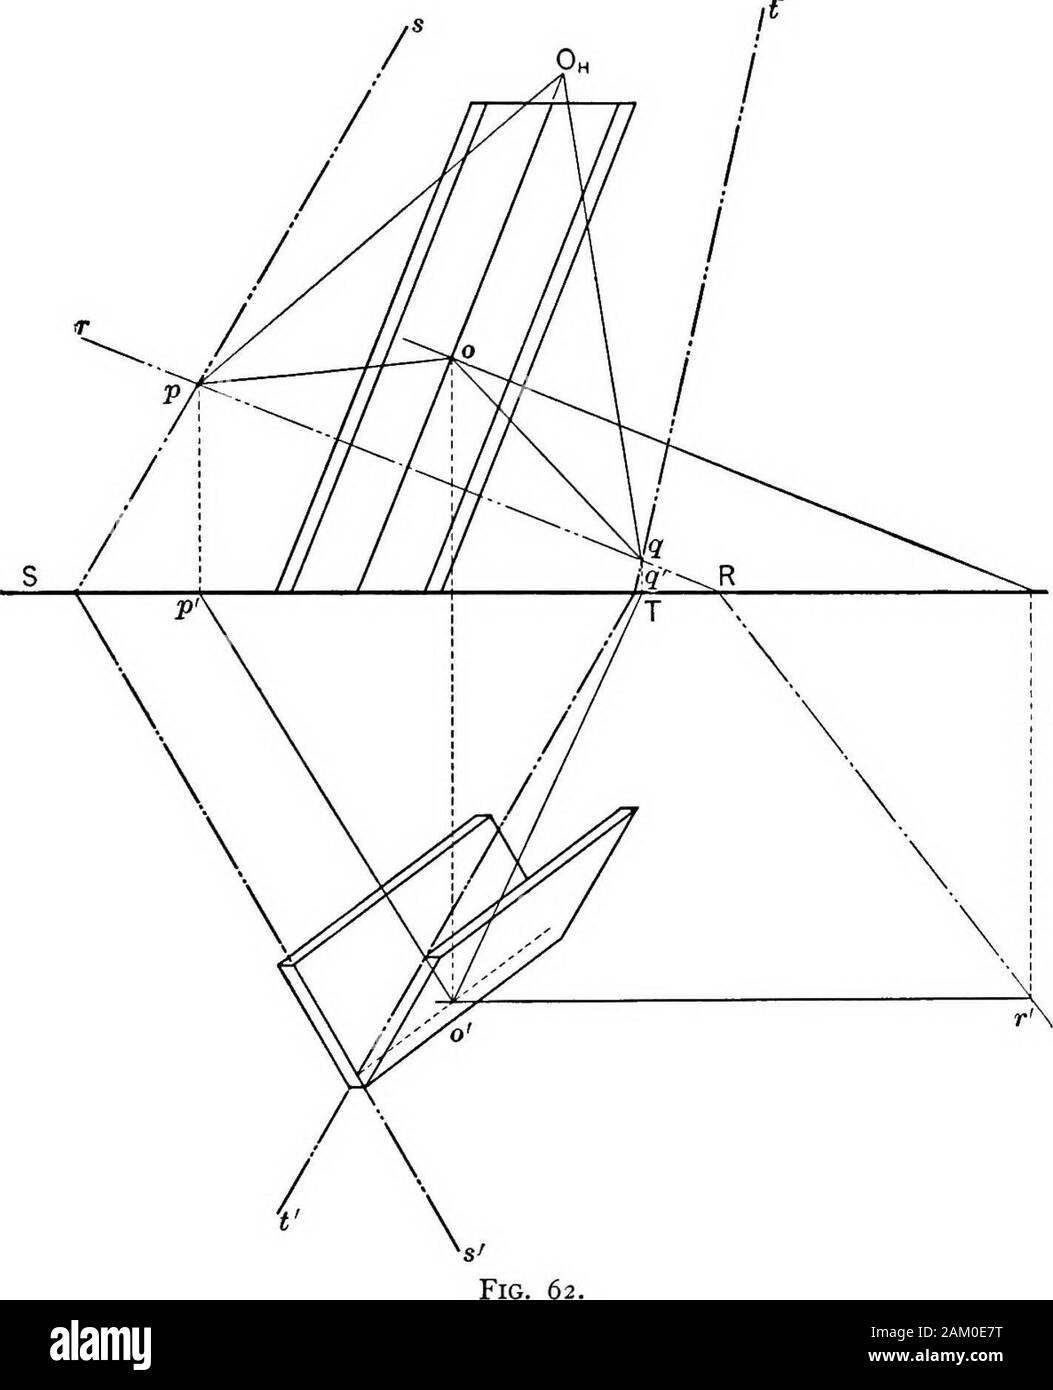 The essentials of descriptive geometry . Fig. 61. Assume the point 0 on the line common to the planes of the twosides, and through this point, by Article 48, pass a plane perpen-dicular to the line. This plane is rRr. Now by Article 54 findthe intersection of R and S, and R and T. This is OP in the firstcase and OQ in the second, and POQ is the required angle. Itstrue size, pOnq, may be found by Article 50. 69. Special Cases, i. Find the angle a plane makes with HandV. PROBLEMS ON POINTS, LINES, AND PLANES 79 2. Find the angle between two planes which are parallel tothe G. L. 70. Proposition 1 Stock Photo